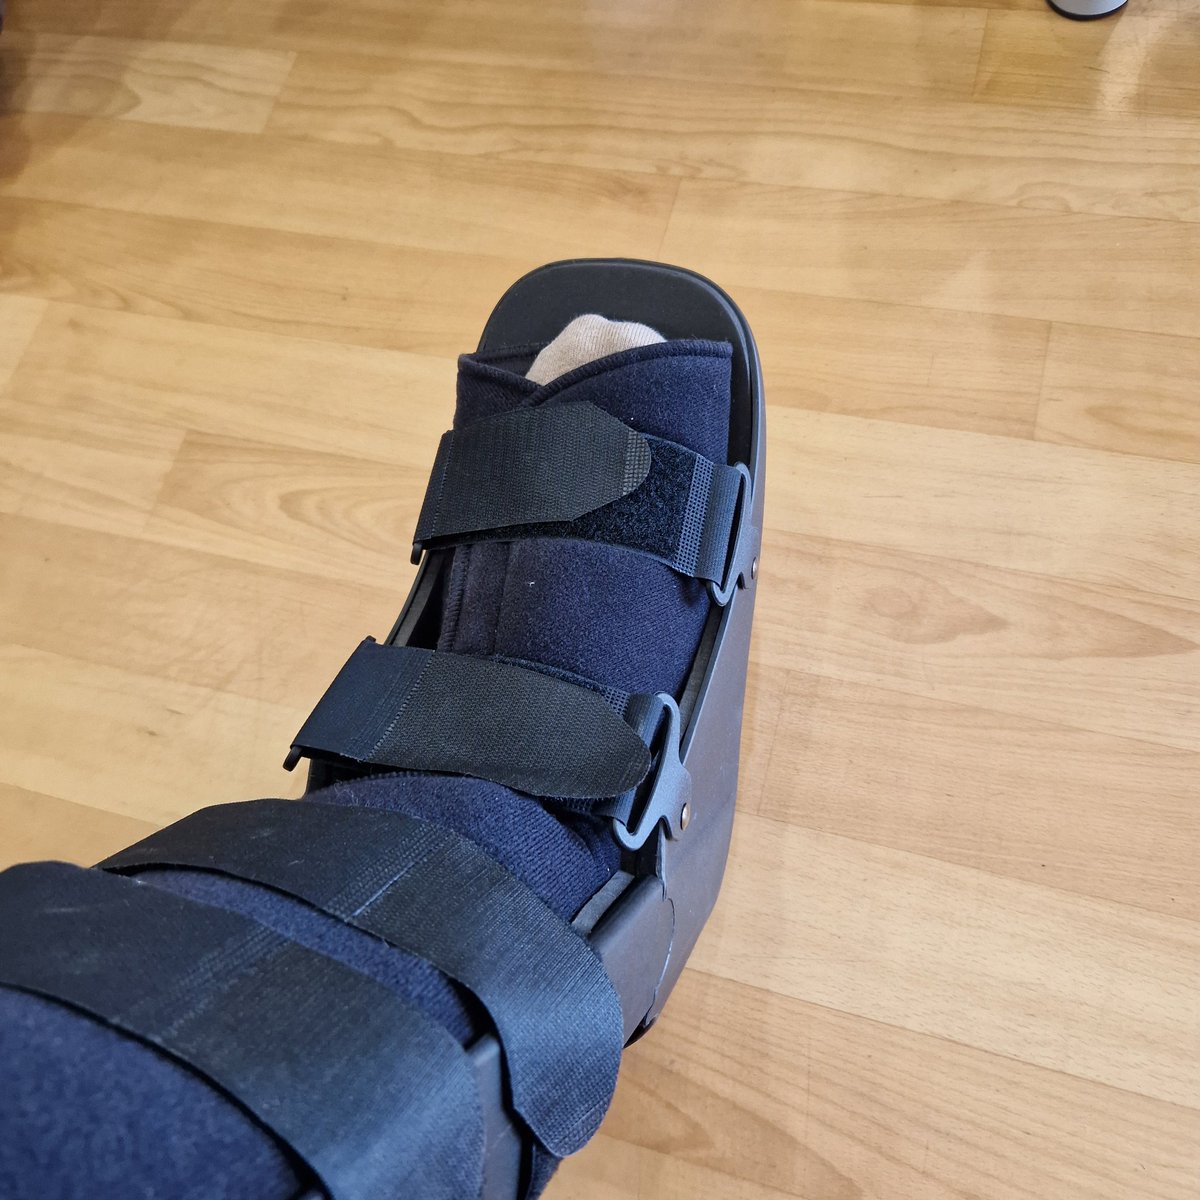 Thank you to St Helier Hospital A&E, who saw me, x-rayed my ankle and sent me home in a special boot! @epsom_sthelier